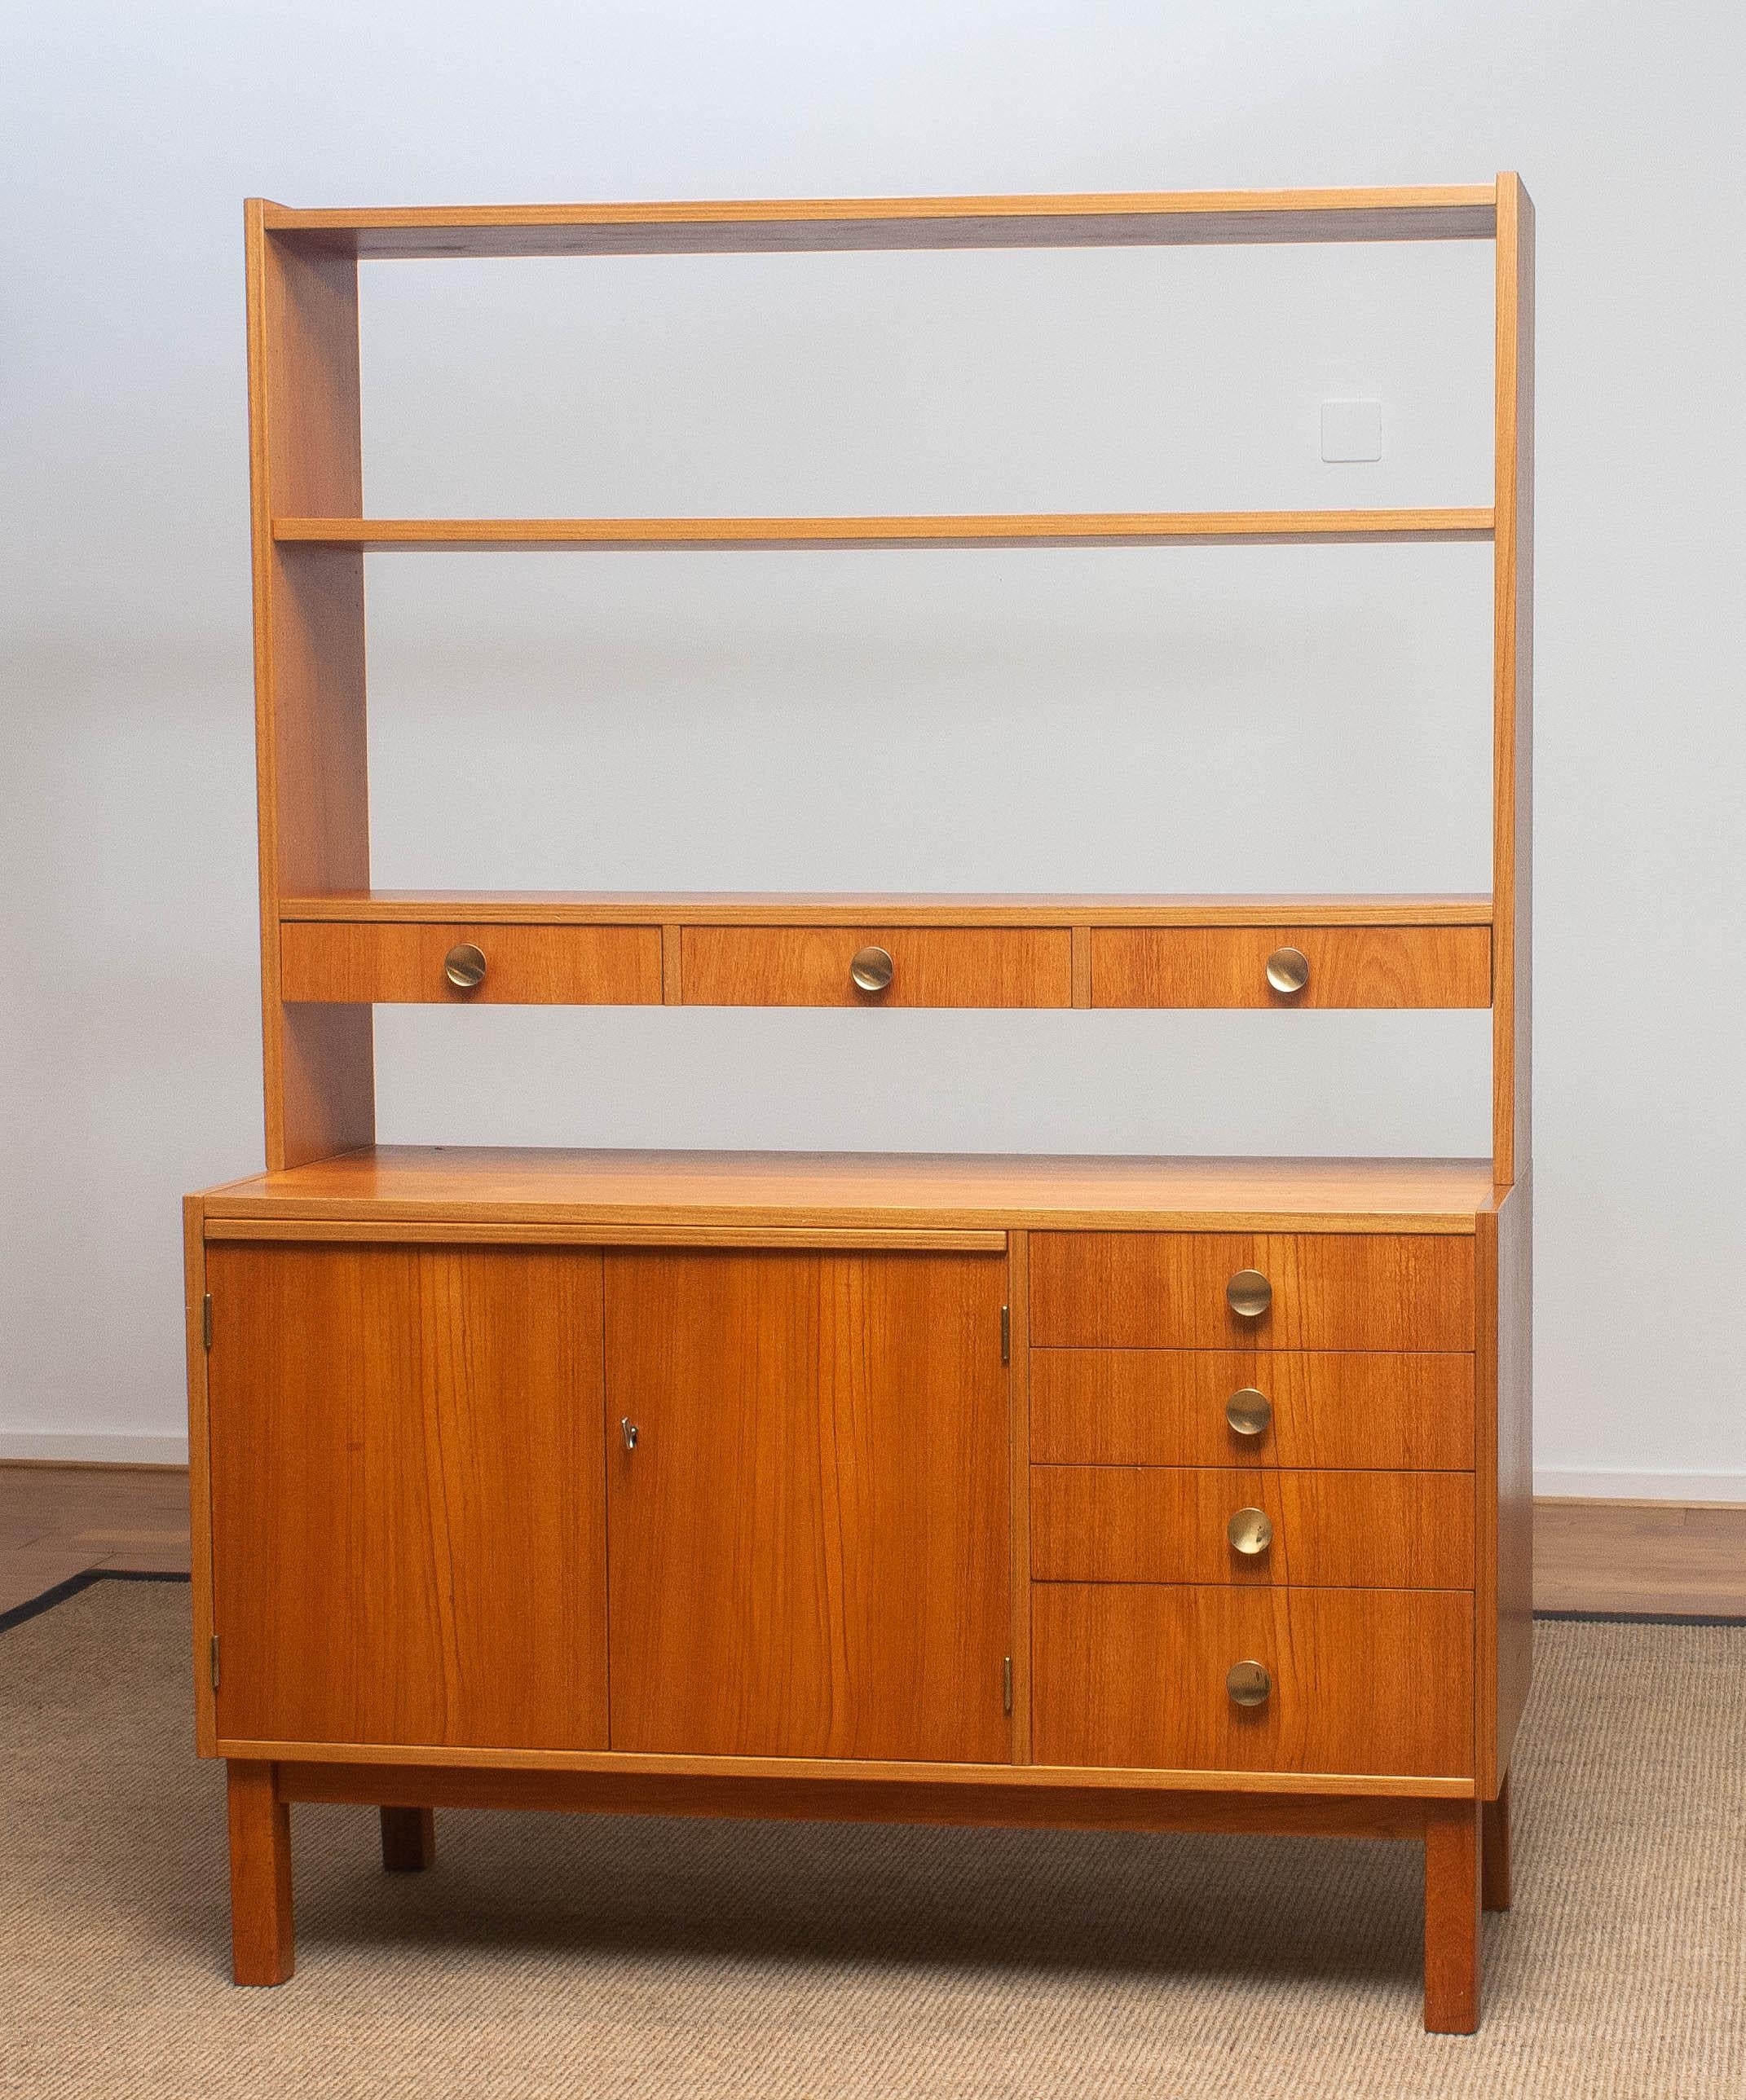 Mid-20th Century 1950s Teak Veneer and Brass Bookshelves Cabinet with Writing Space from Sweden